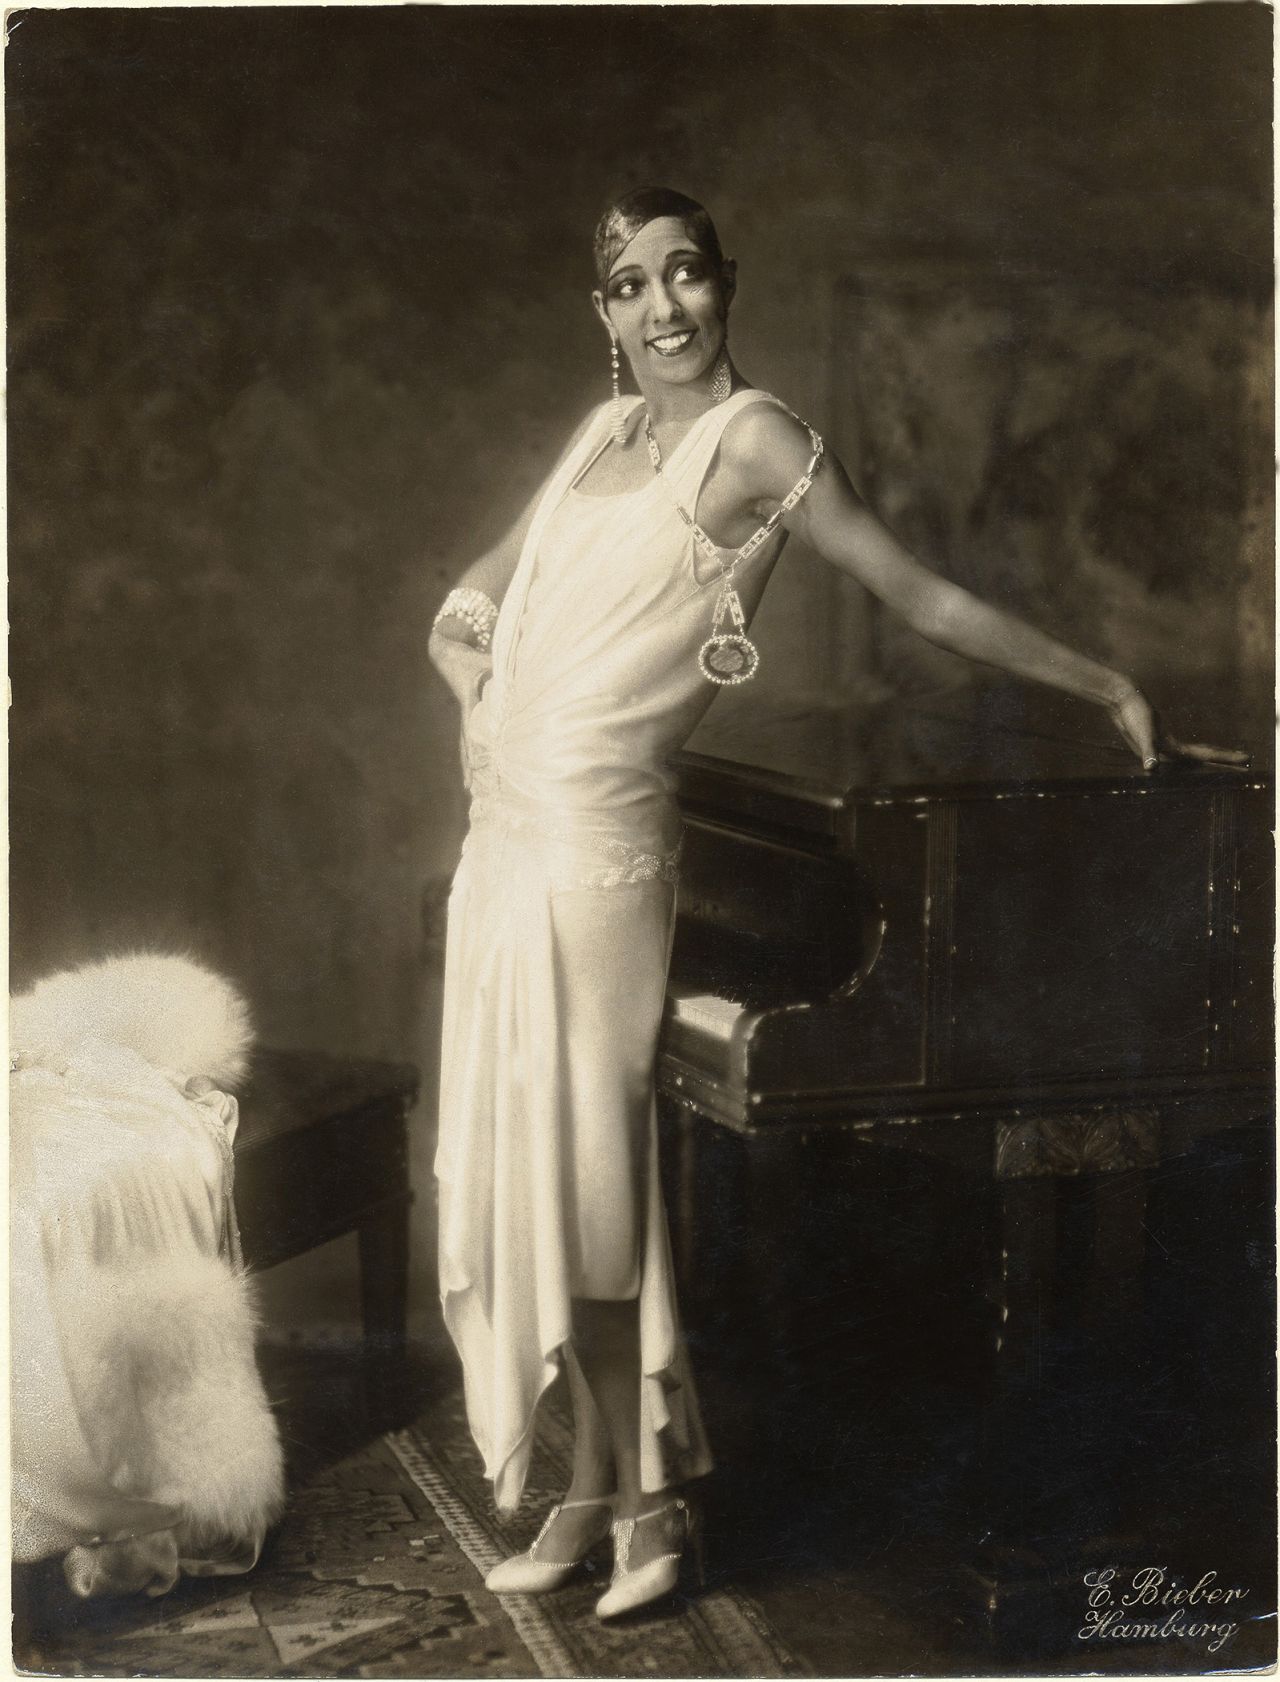 Iconic performer Josephine Baker poses in a circa-1924 promotional portrait. She is wearing a loosely-draped white flapper dress and leaning against a piano.